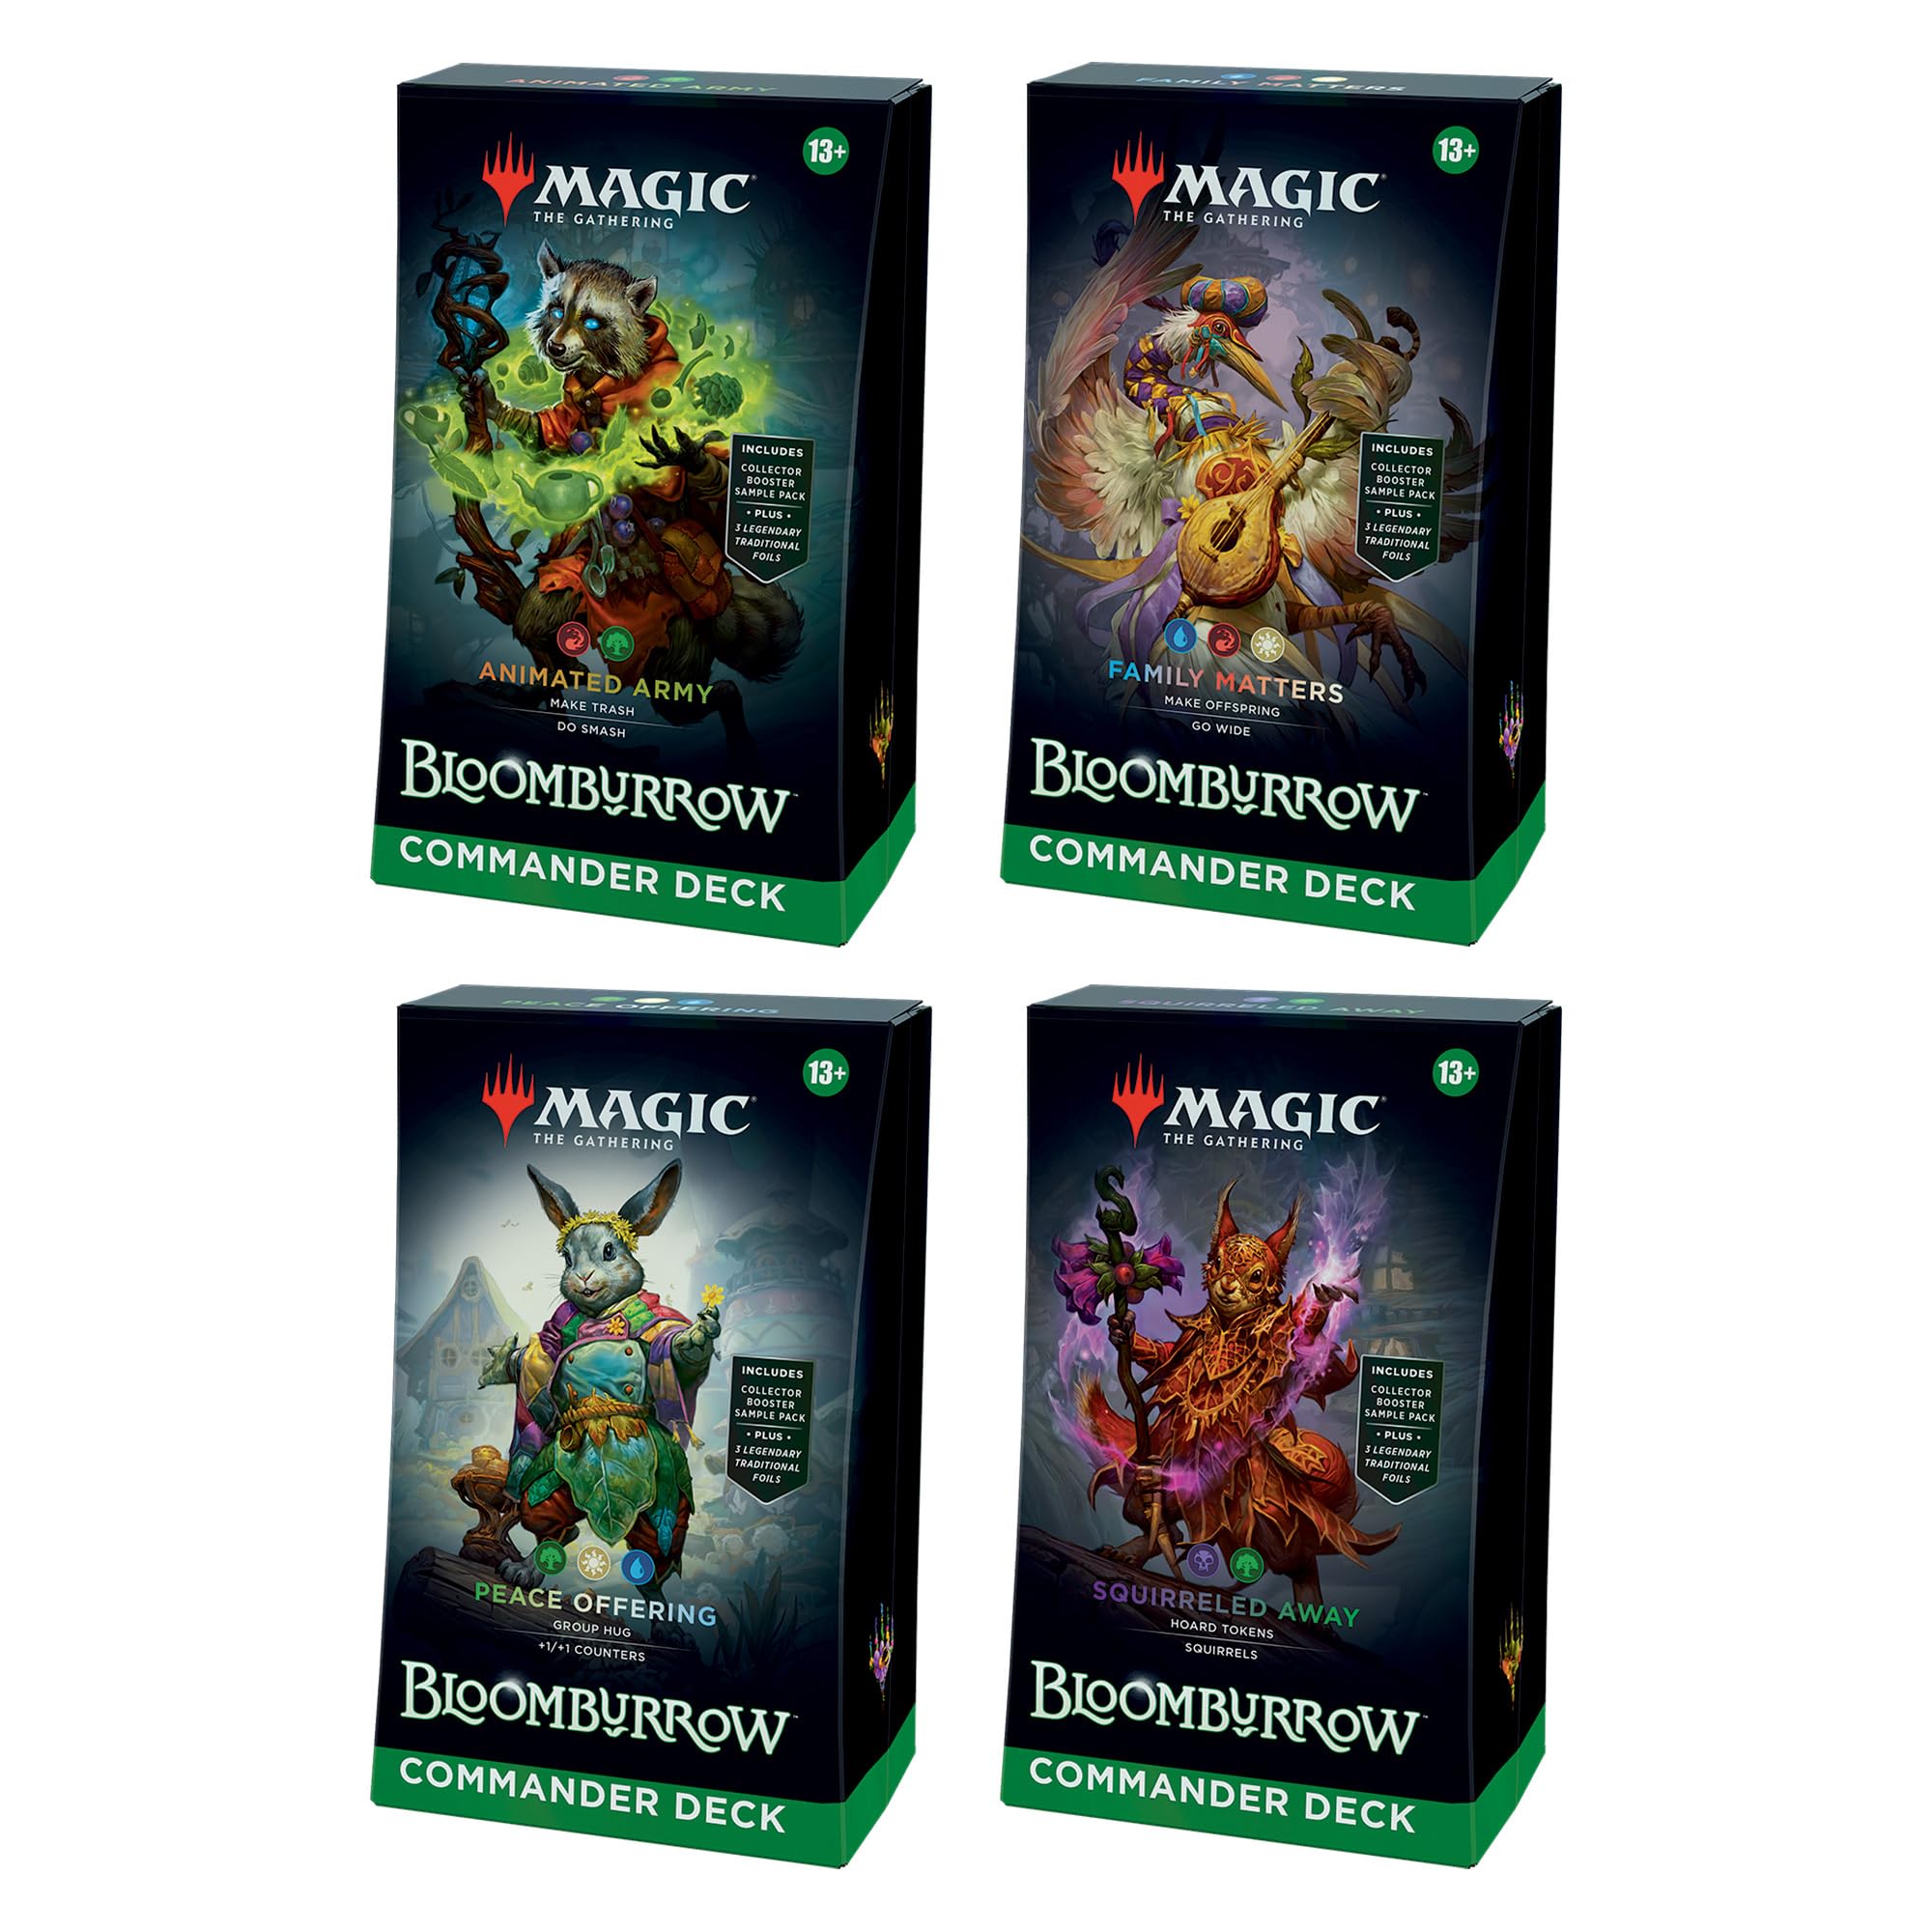 Magic: The Gathering Bloomburrow Commander Deck Bundle - Includes All 4 Decks (Animated Army, Family Matters, Peace Offering, and Squirreled Away)